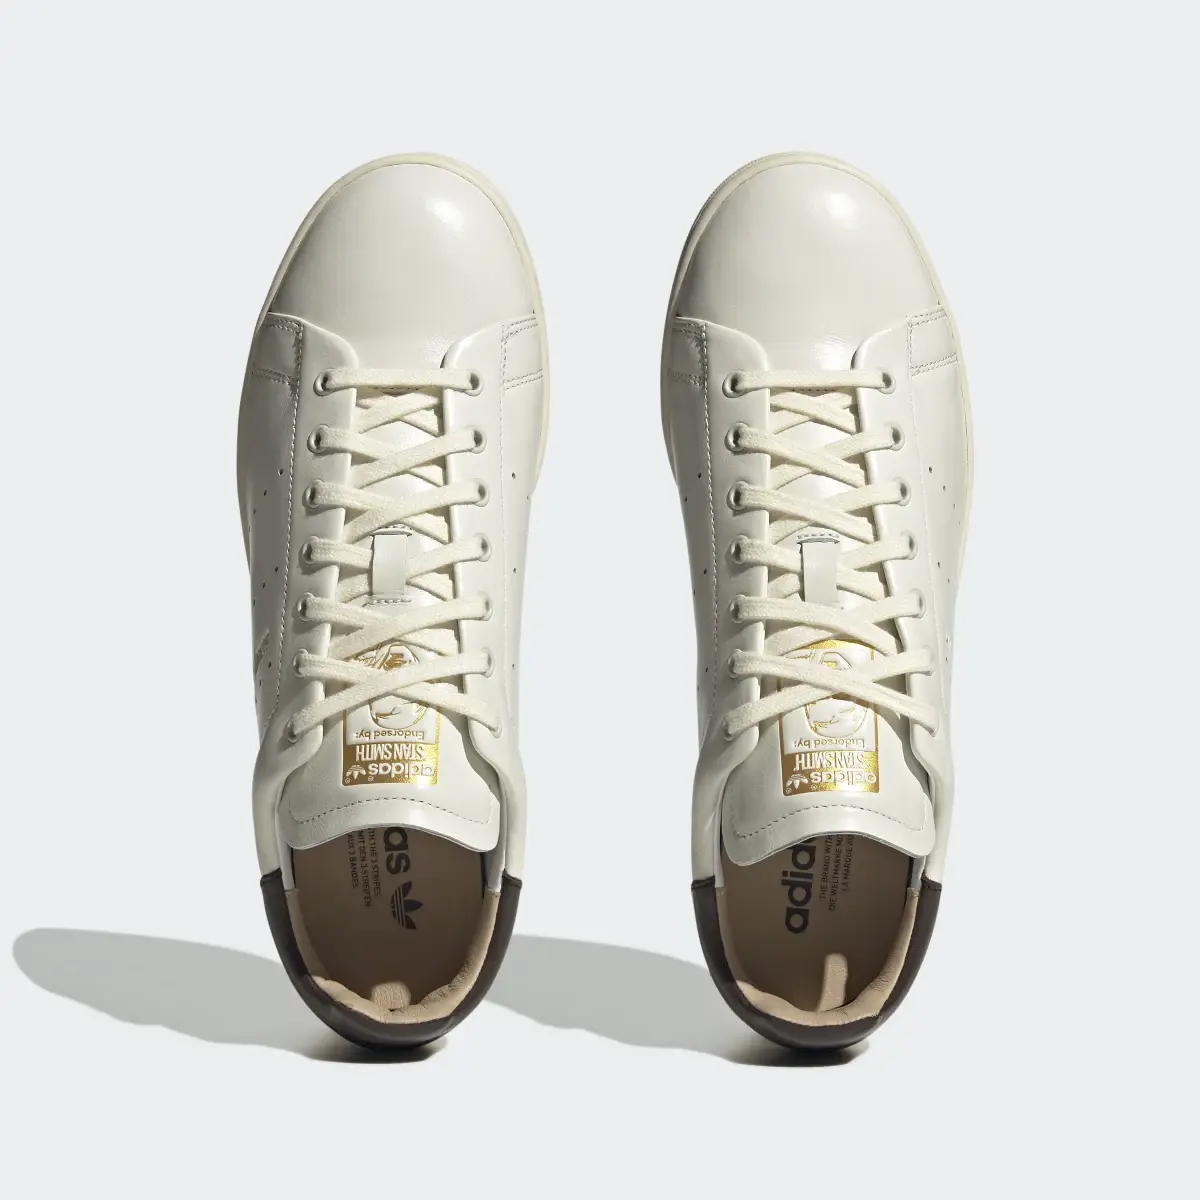 Adidas Stan Smith Lux Shoes. 3